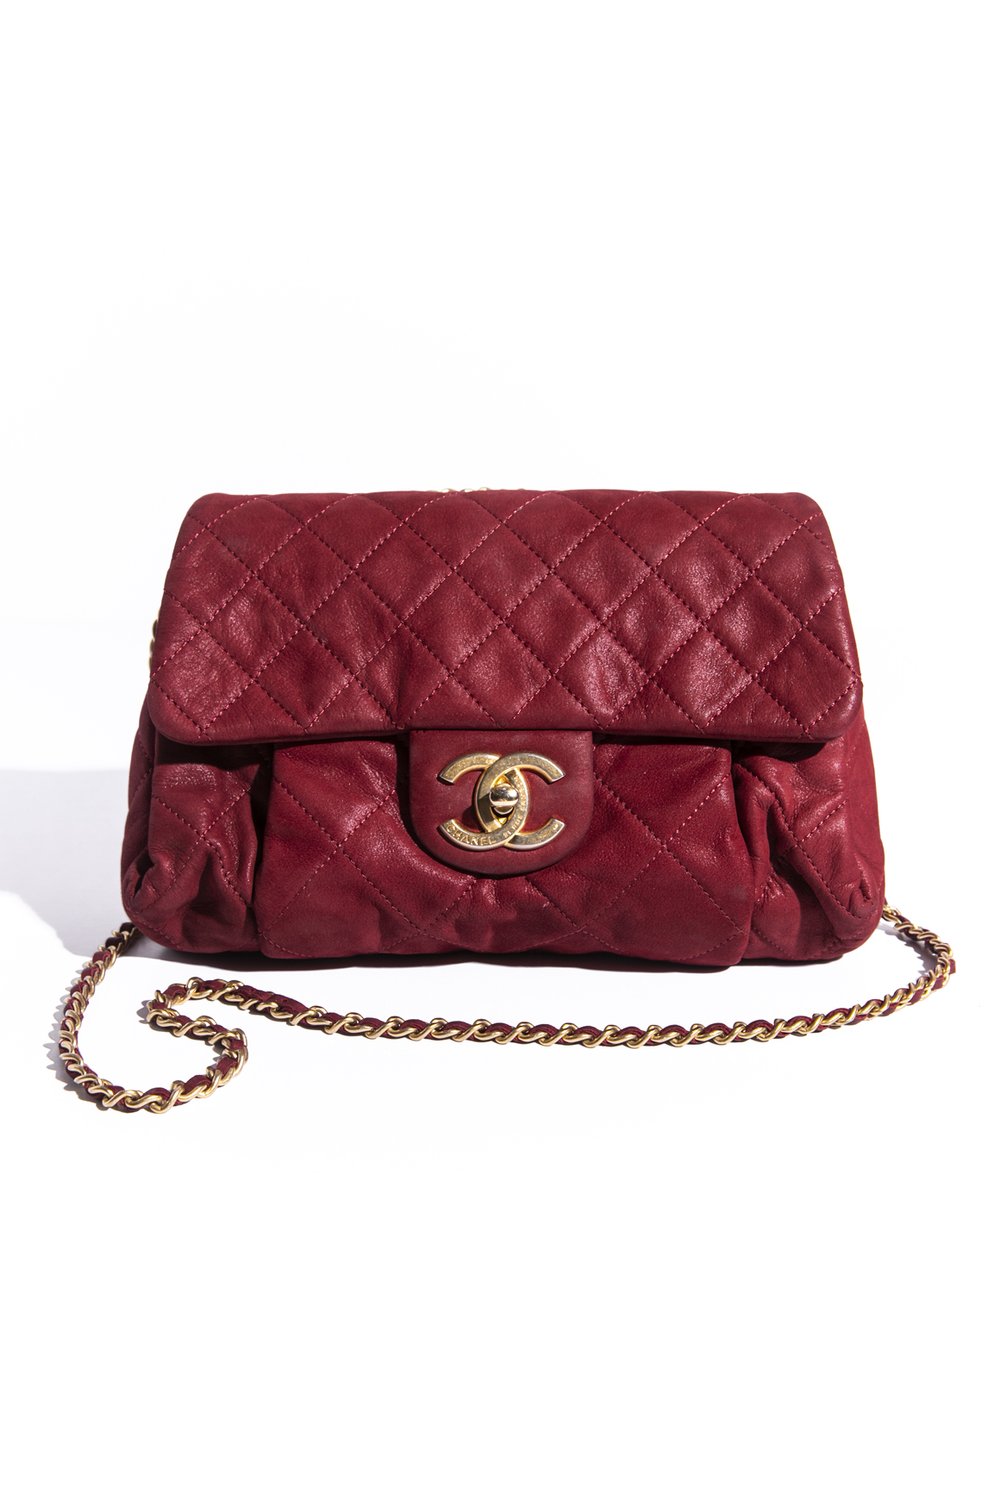 CHANEL Red Suede Sac Rabat Bag — MOSS Designer Consignment